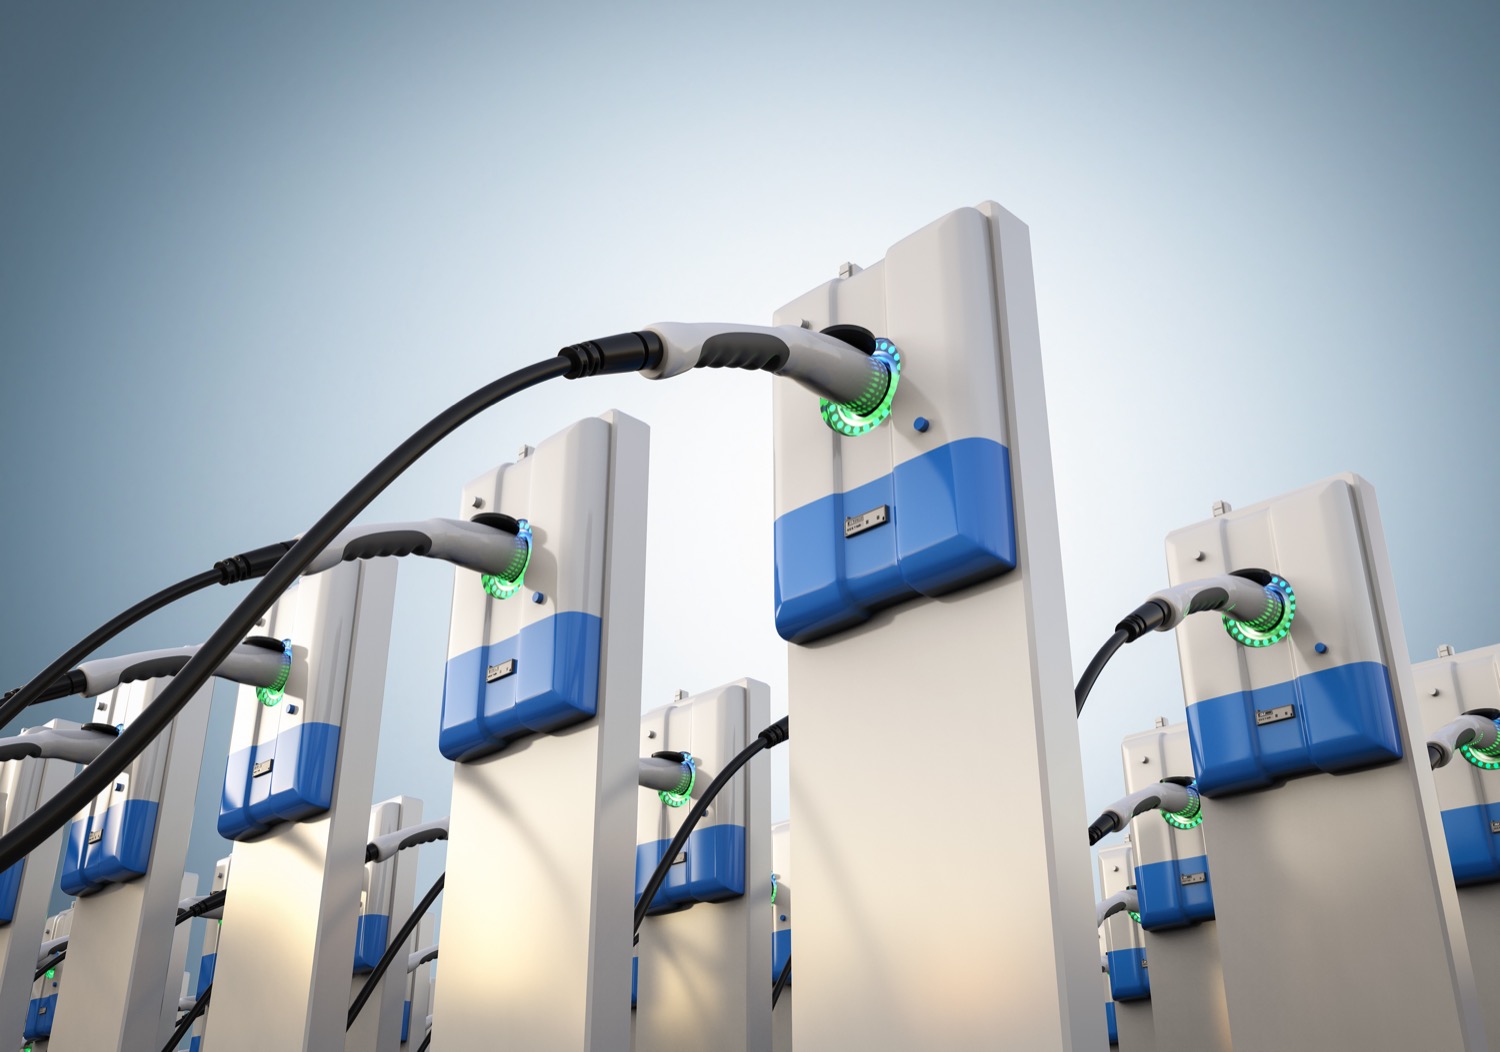 a 3d photo-real rendering of a dozen or so electric vehicle chargers, placed in three rows